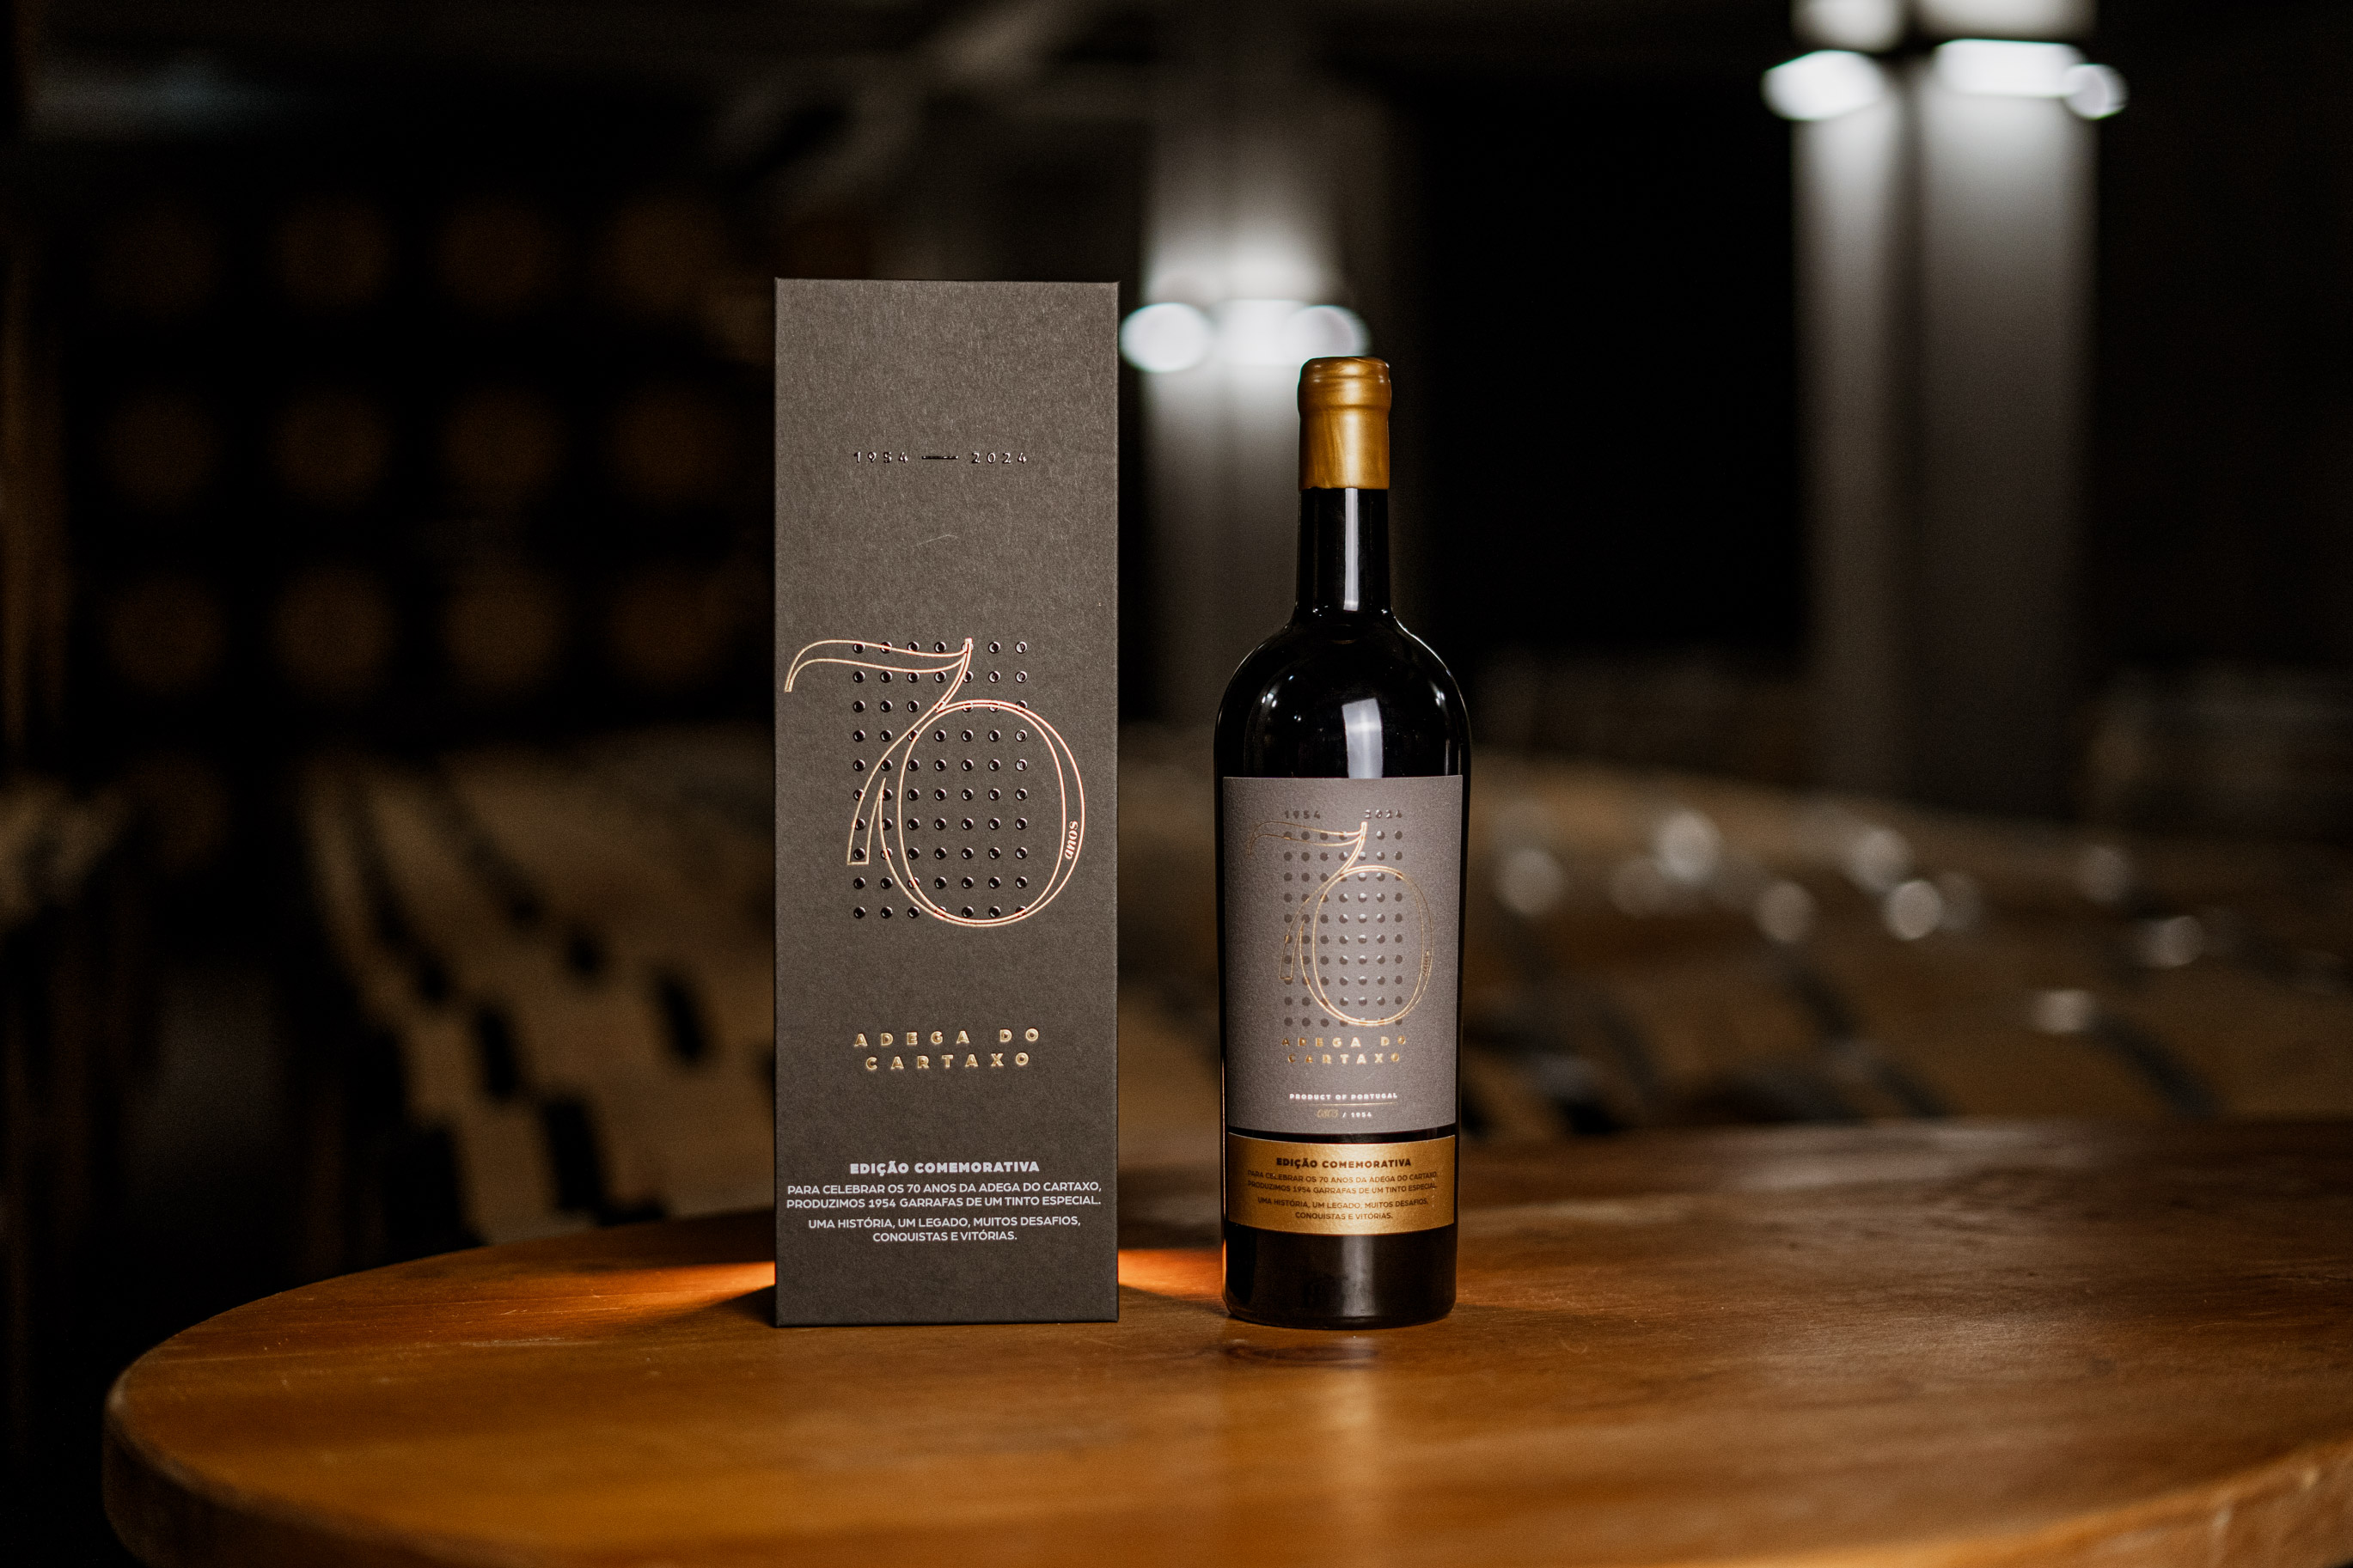 Visuals Crafts a Stunning Commemorative Label for Adega do Cartaxo 70 Years Wine Label, Packaging Design and Branding